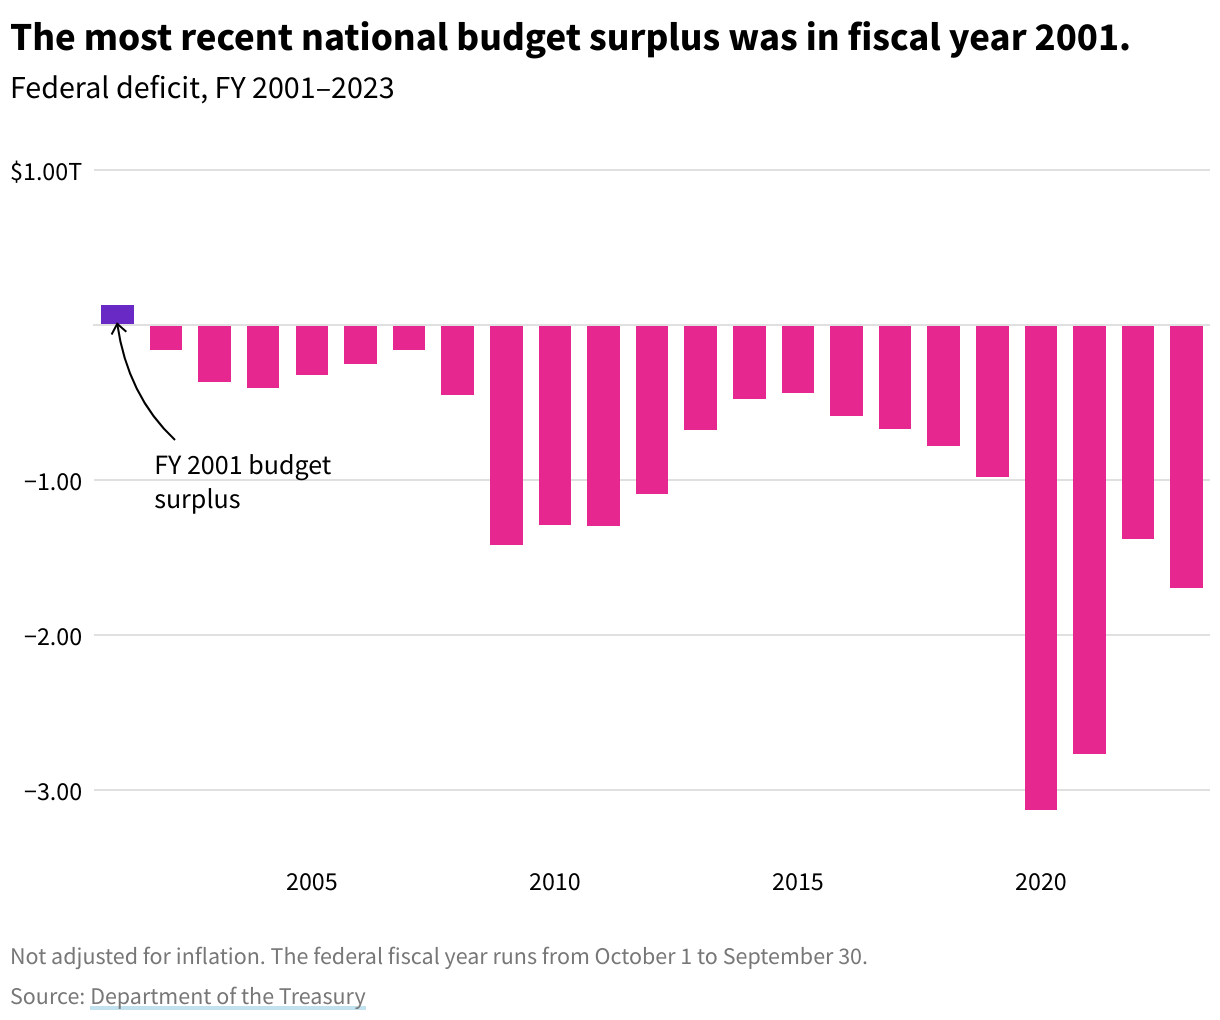 Bar chart showing the national deficit from fiscal year 2001 to fiscal year 2023.